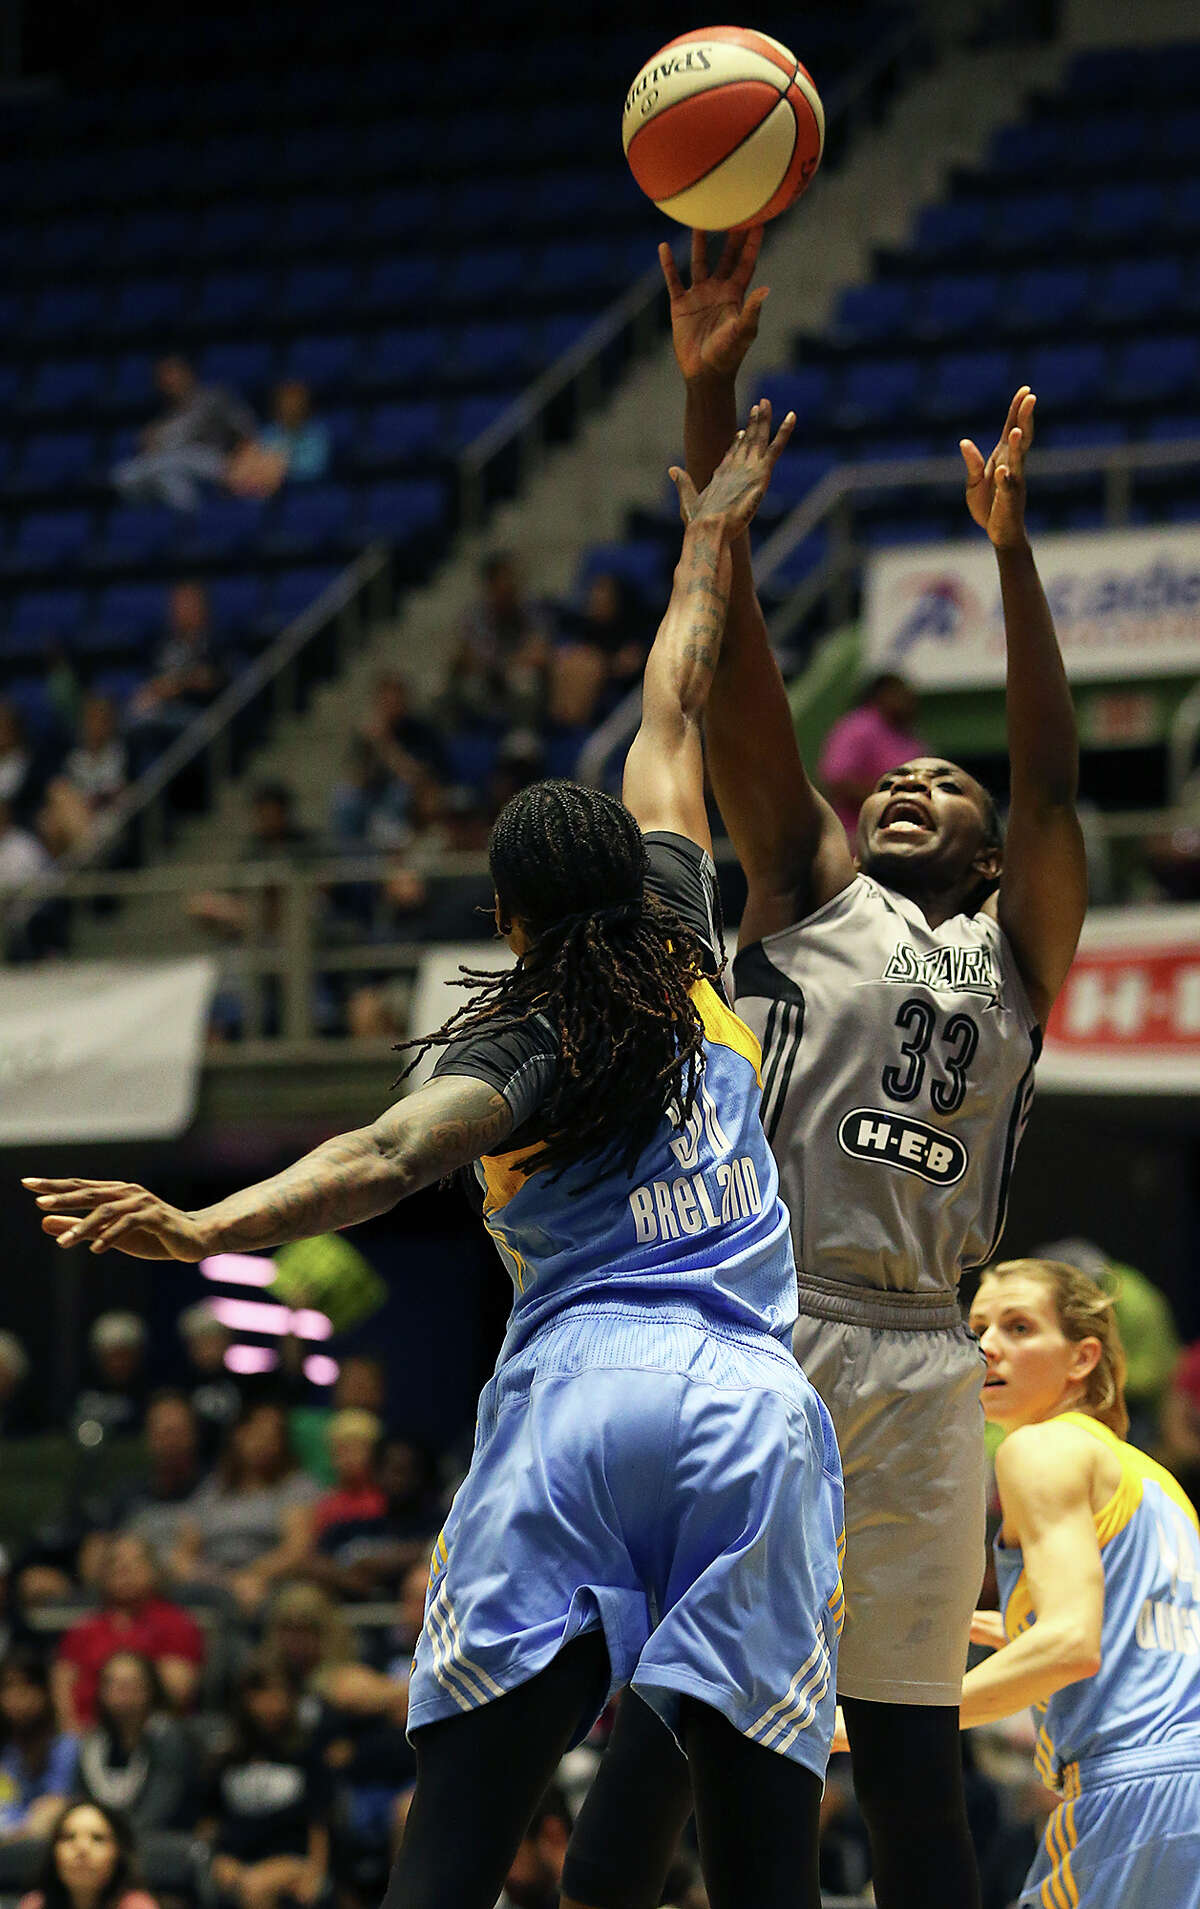 Sophia Young-Malcolm gets off a jumper against Jessica Breland as the San Antonio Stars host the Chicago Sky at Freeman Coliseum on June 20, 2015.